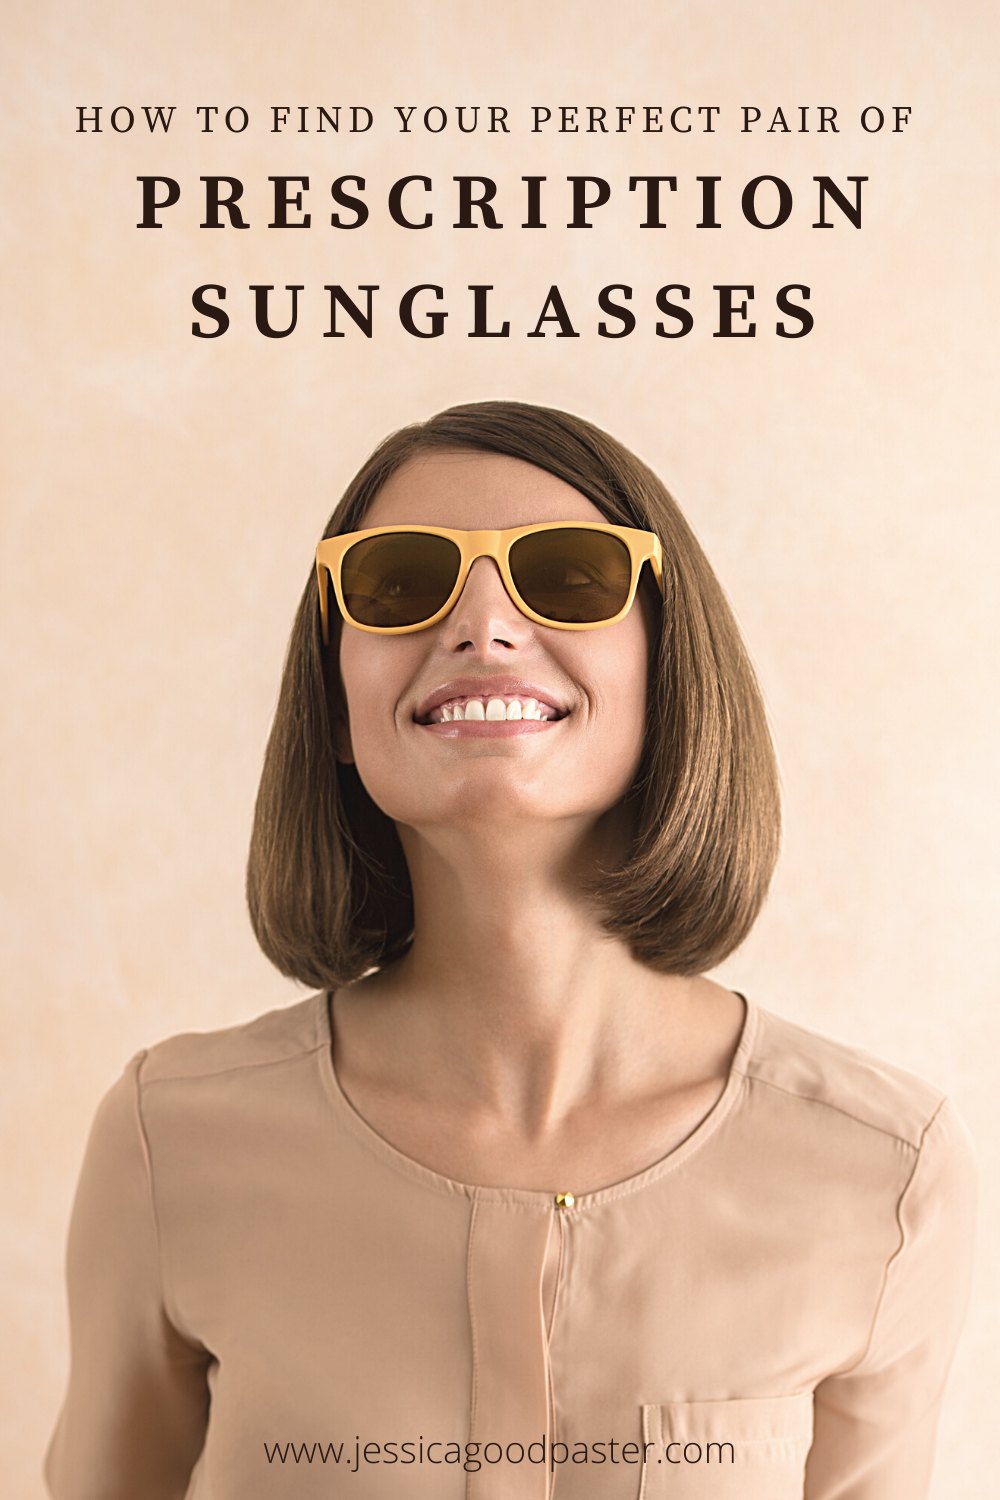 How to Find Your Perfect Pair of Prescription Sunglasses | The Home Try-On Program from Warby Parker lets you test out five pairs of sunglasses for free! Get affordable, stylish prescription sunglasses from the comfort of your house. Check out my experience with the Fall 2020 Collection today. #warbyparker #sunglasses #shopathome #glasses